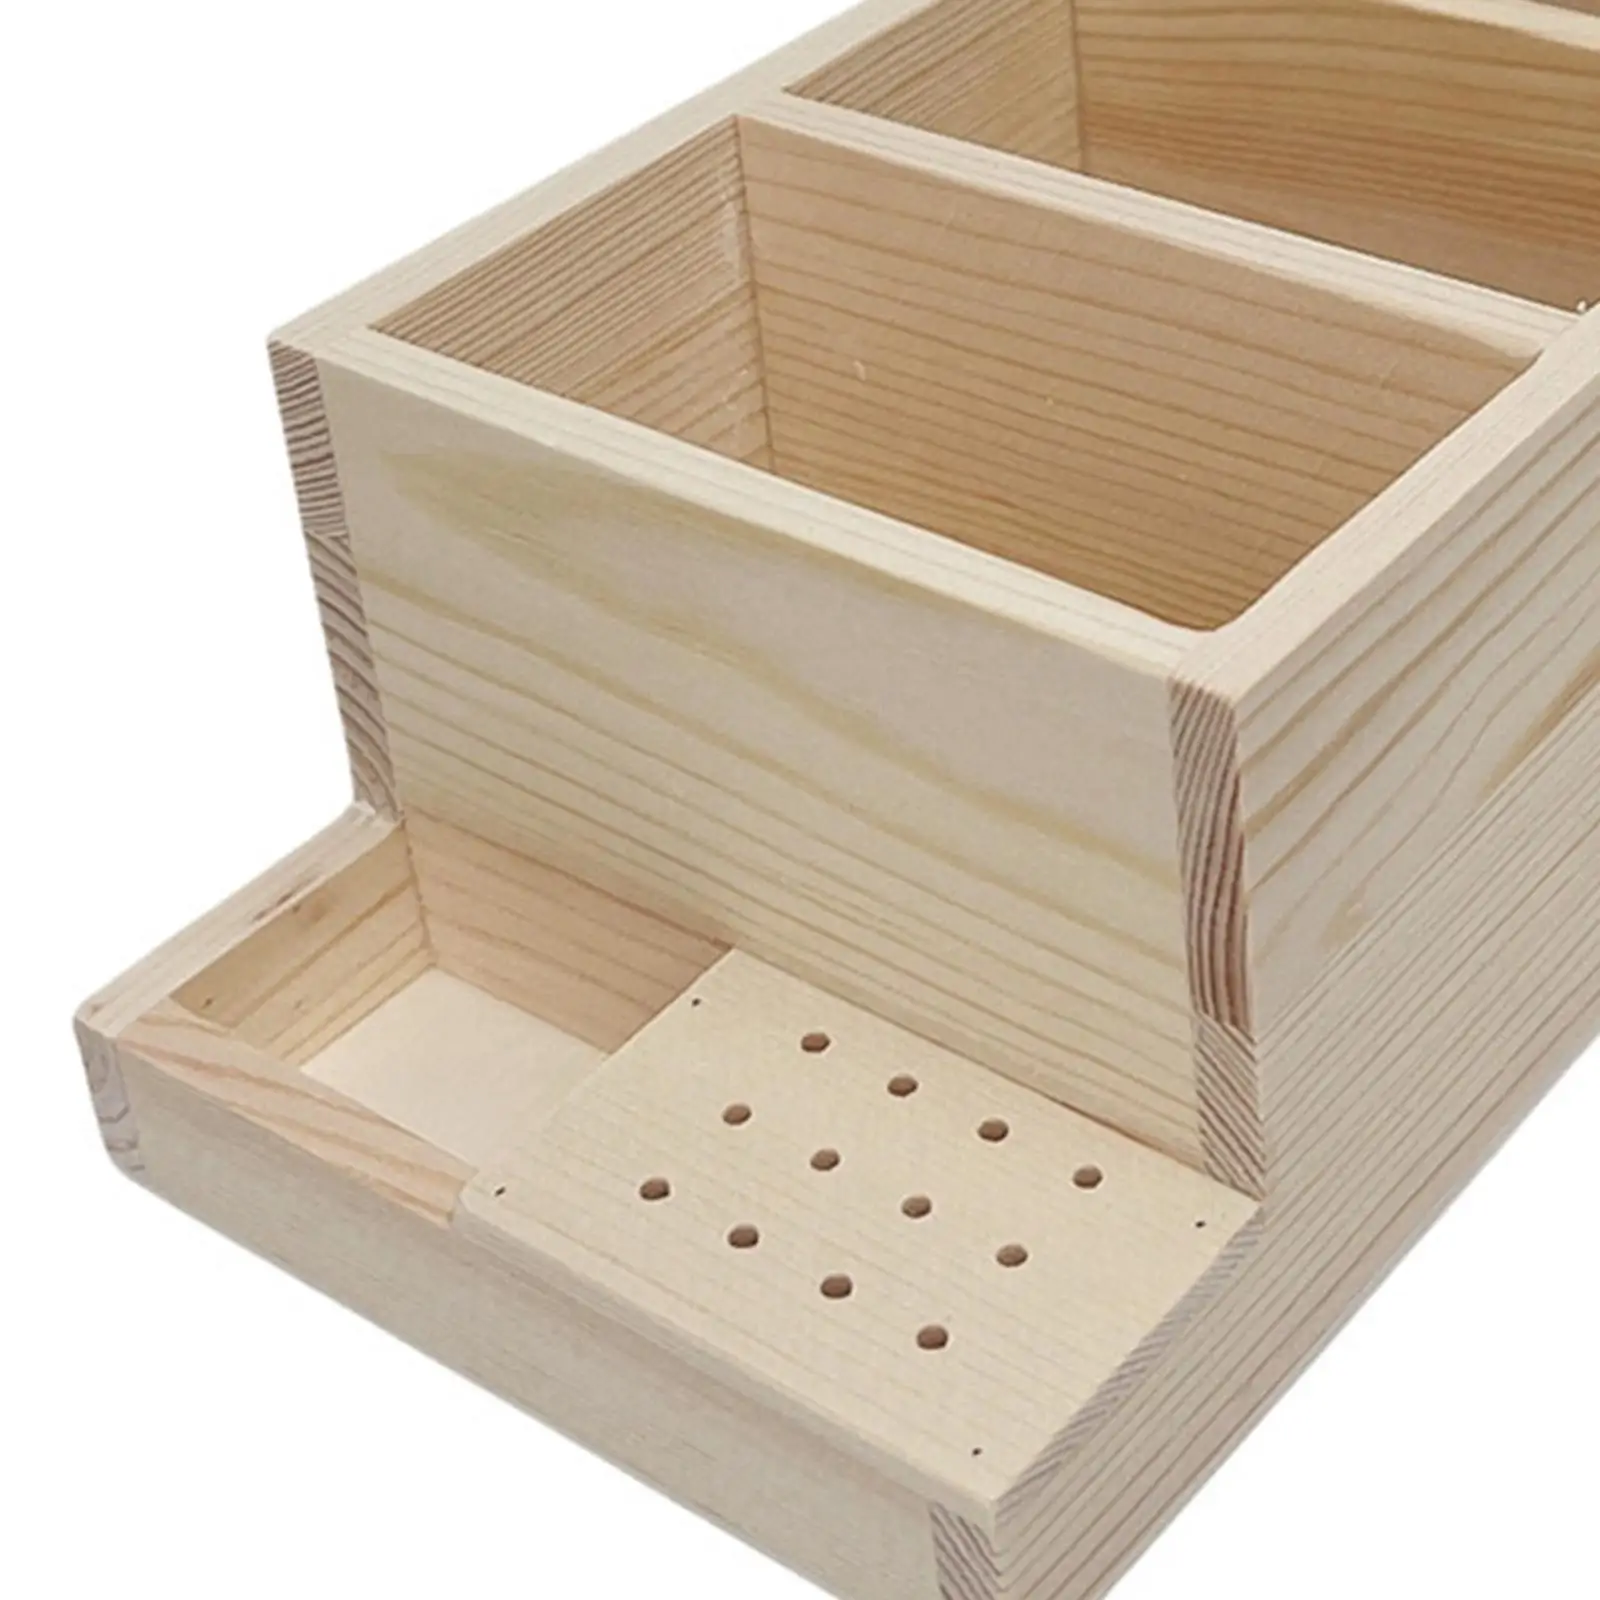 Nail Drill Bits Wood Stand Organizer for Nail Training Lowest Row with 12 Holes Container